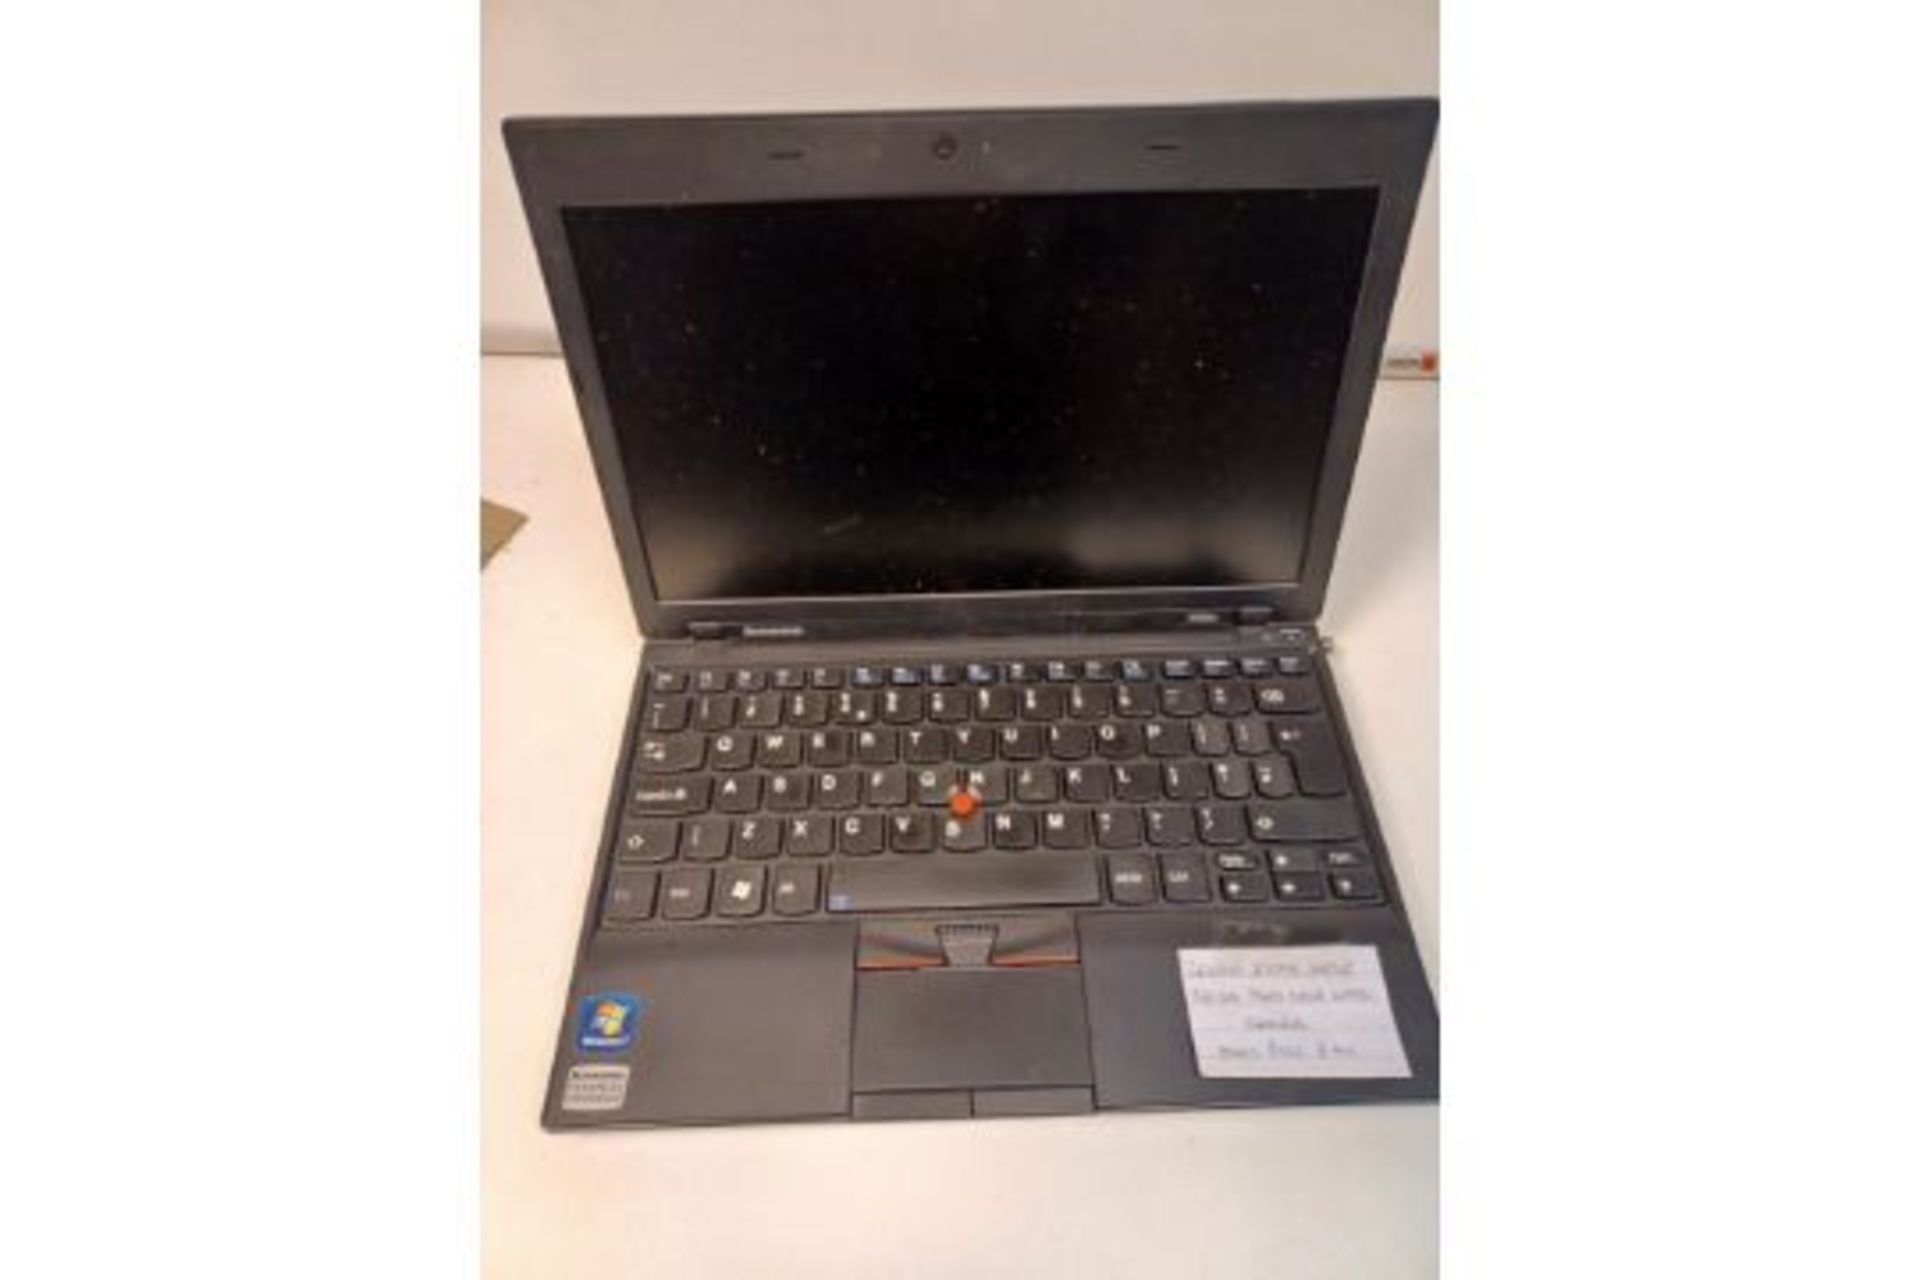 LENOVO X100E LAPTOP 320GB HARD DRIVE WITH CHARGER (17)